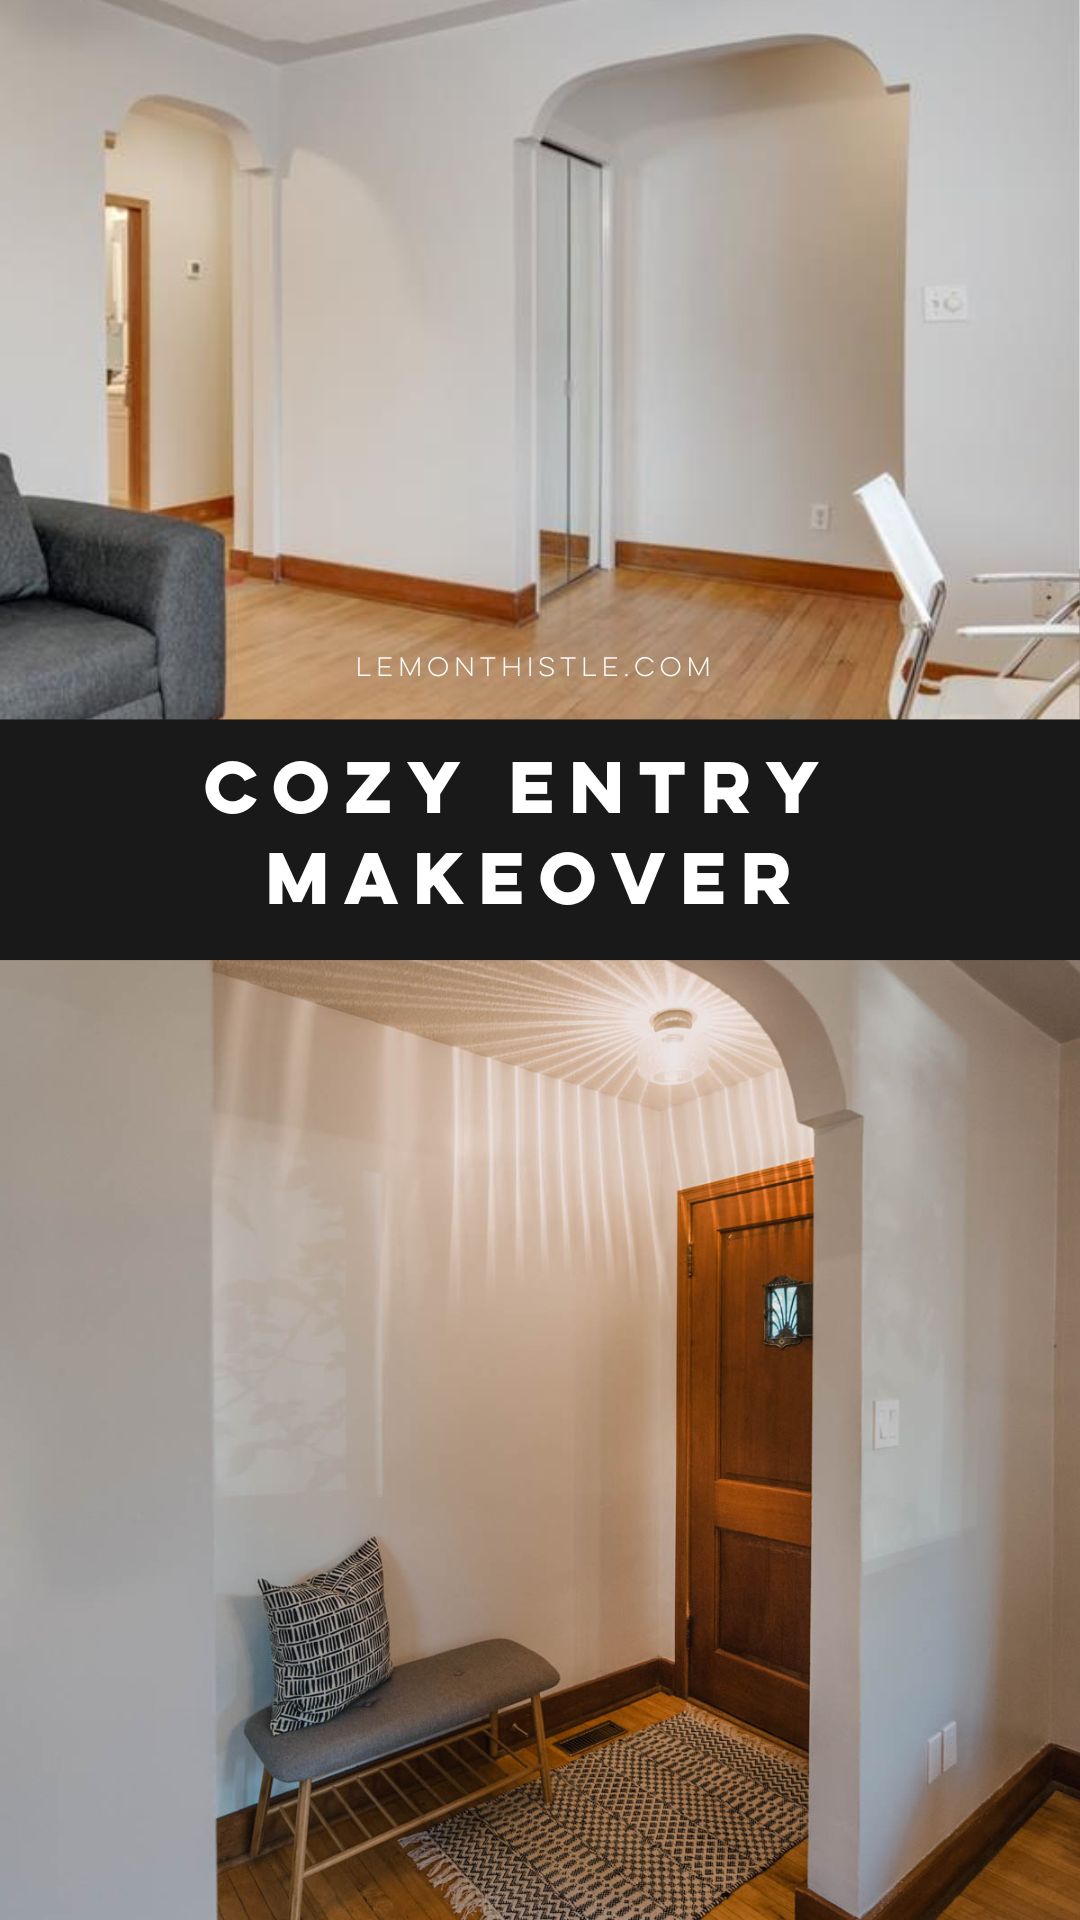 Cozy entry makeover with decorative archway